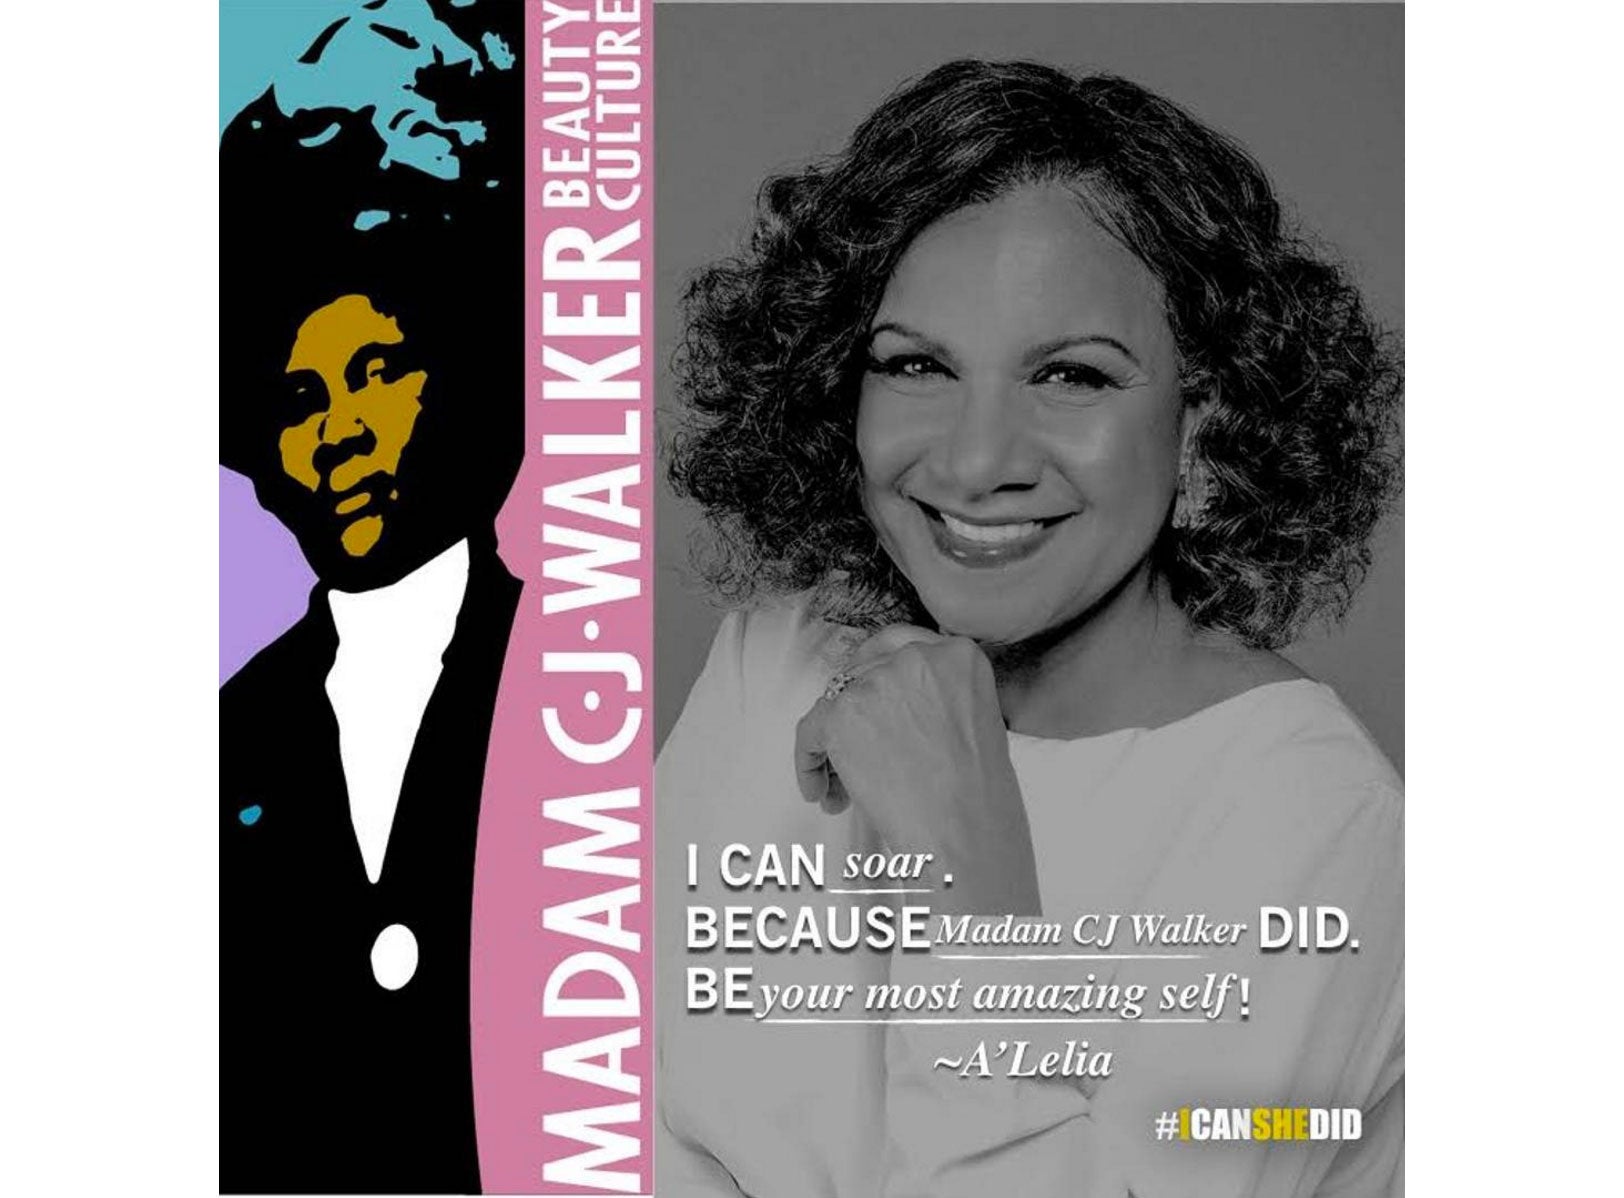 Madam C.J. Walker Beauty Brand Inspires Women With #ICanSheDid Campaign
